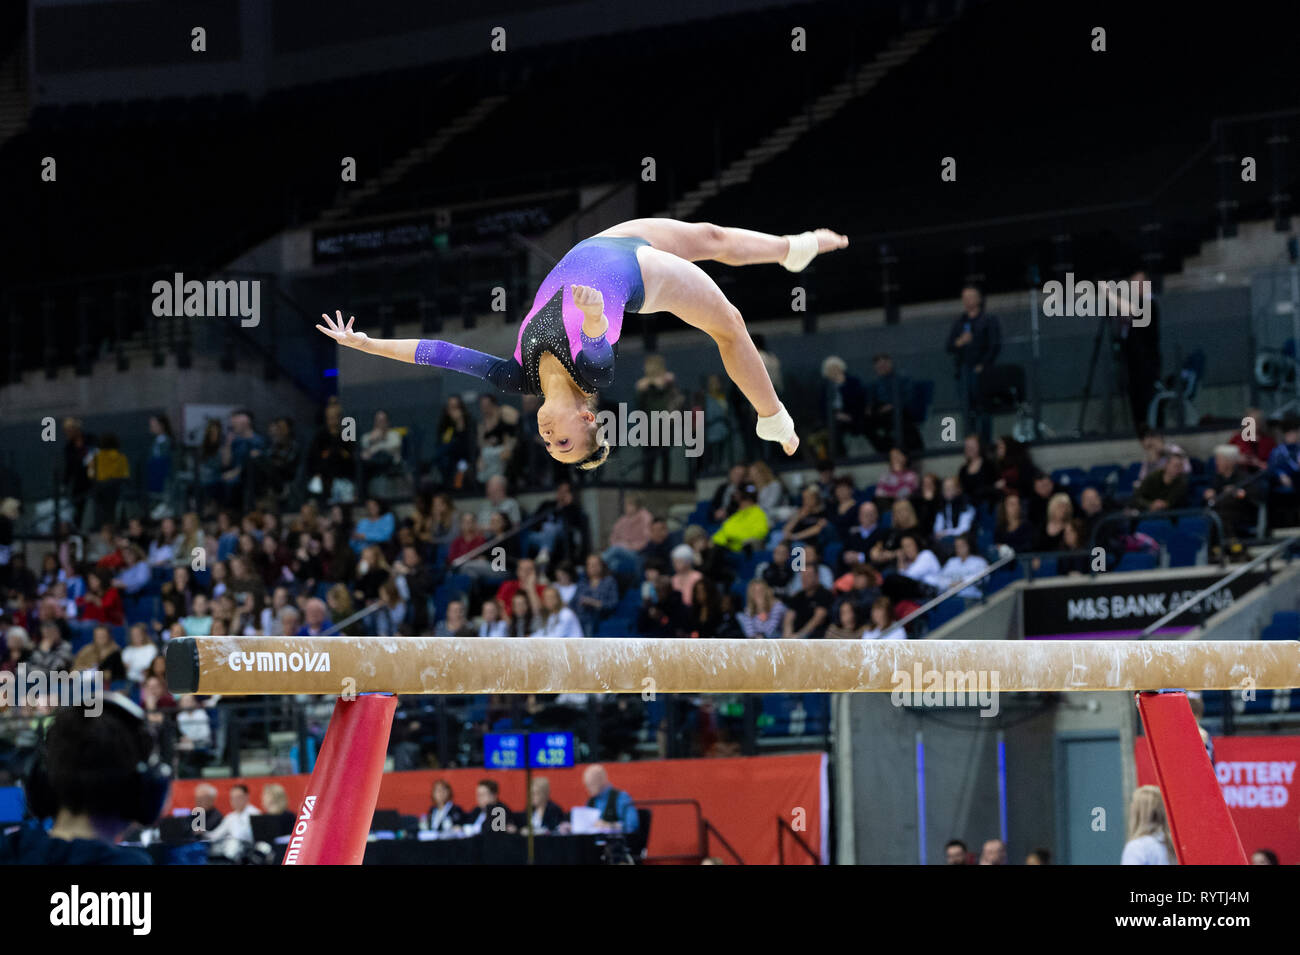 Liverpool, UK. 15th Mar, 2019. Jessica Wright of Dynamic Gymnastics competing during the beam rotation at the Men's and Women's Artistic British Championships 2019, M&S Bank Arena, Liverpool, UK. Credit: Iain Scott Photography/Alamy Live News Stock Photo